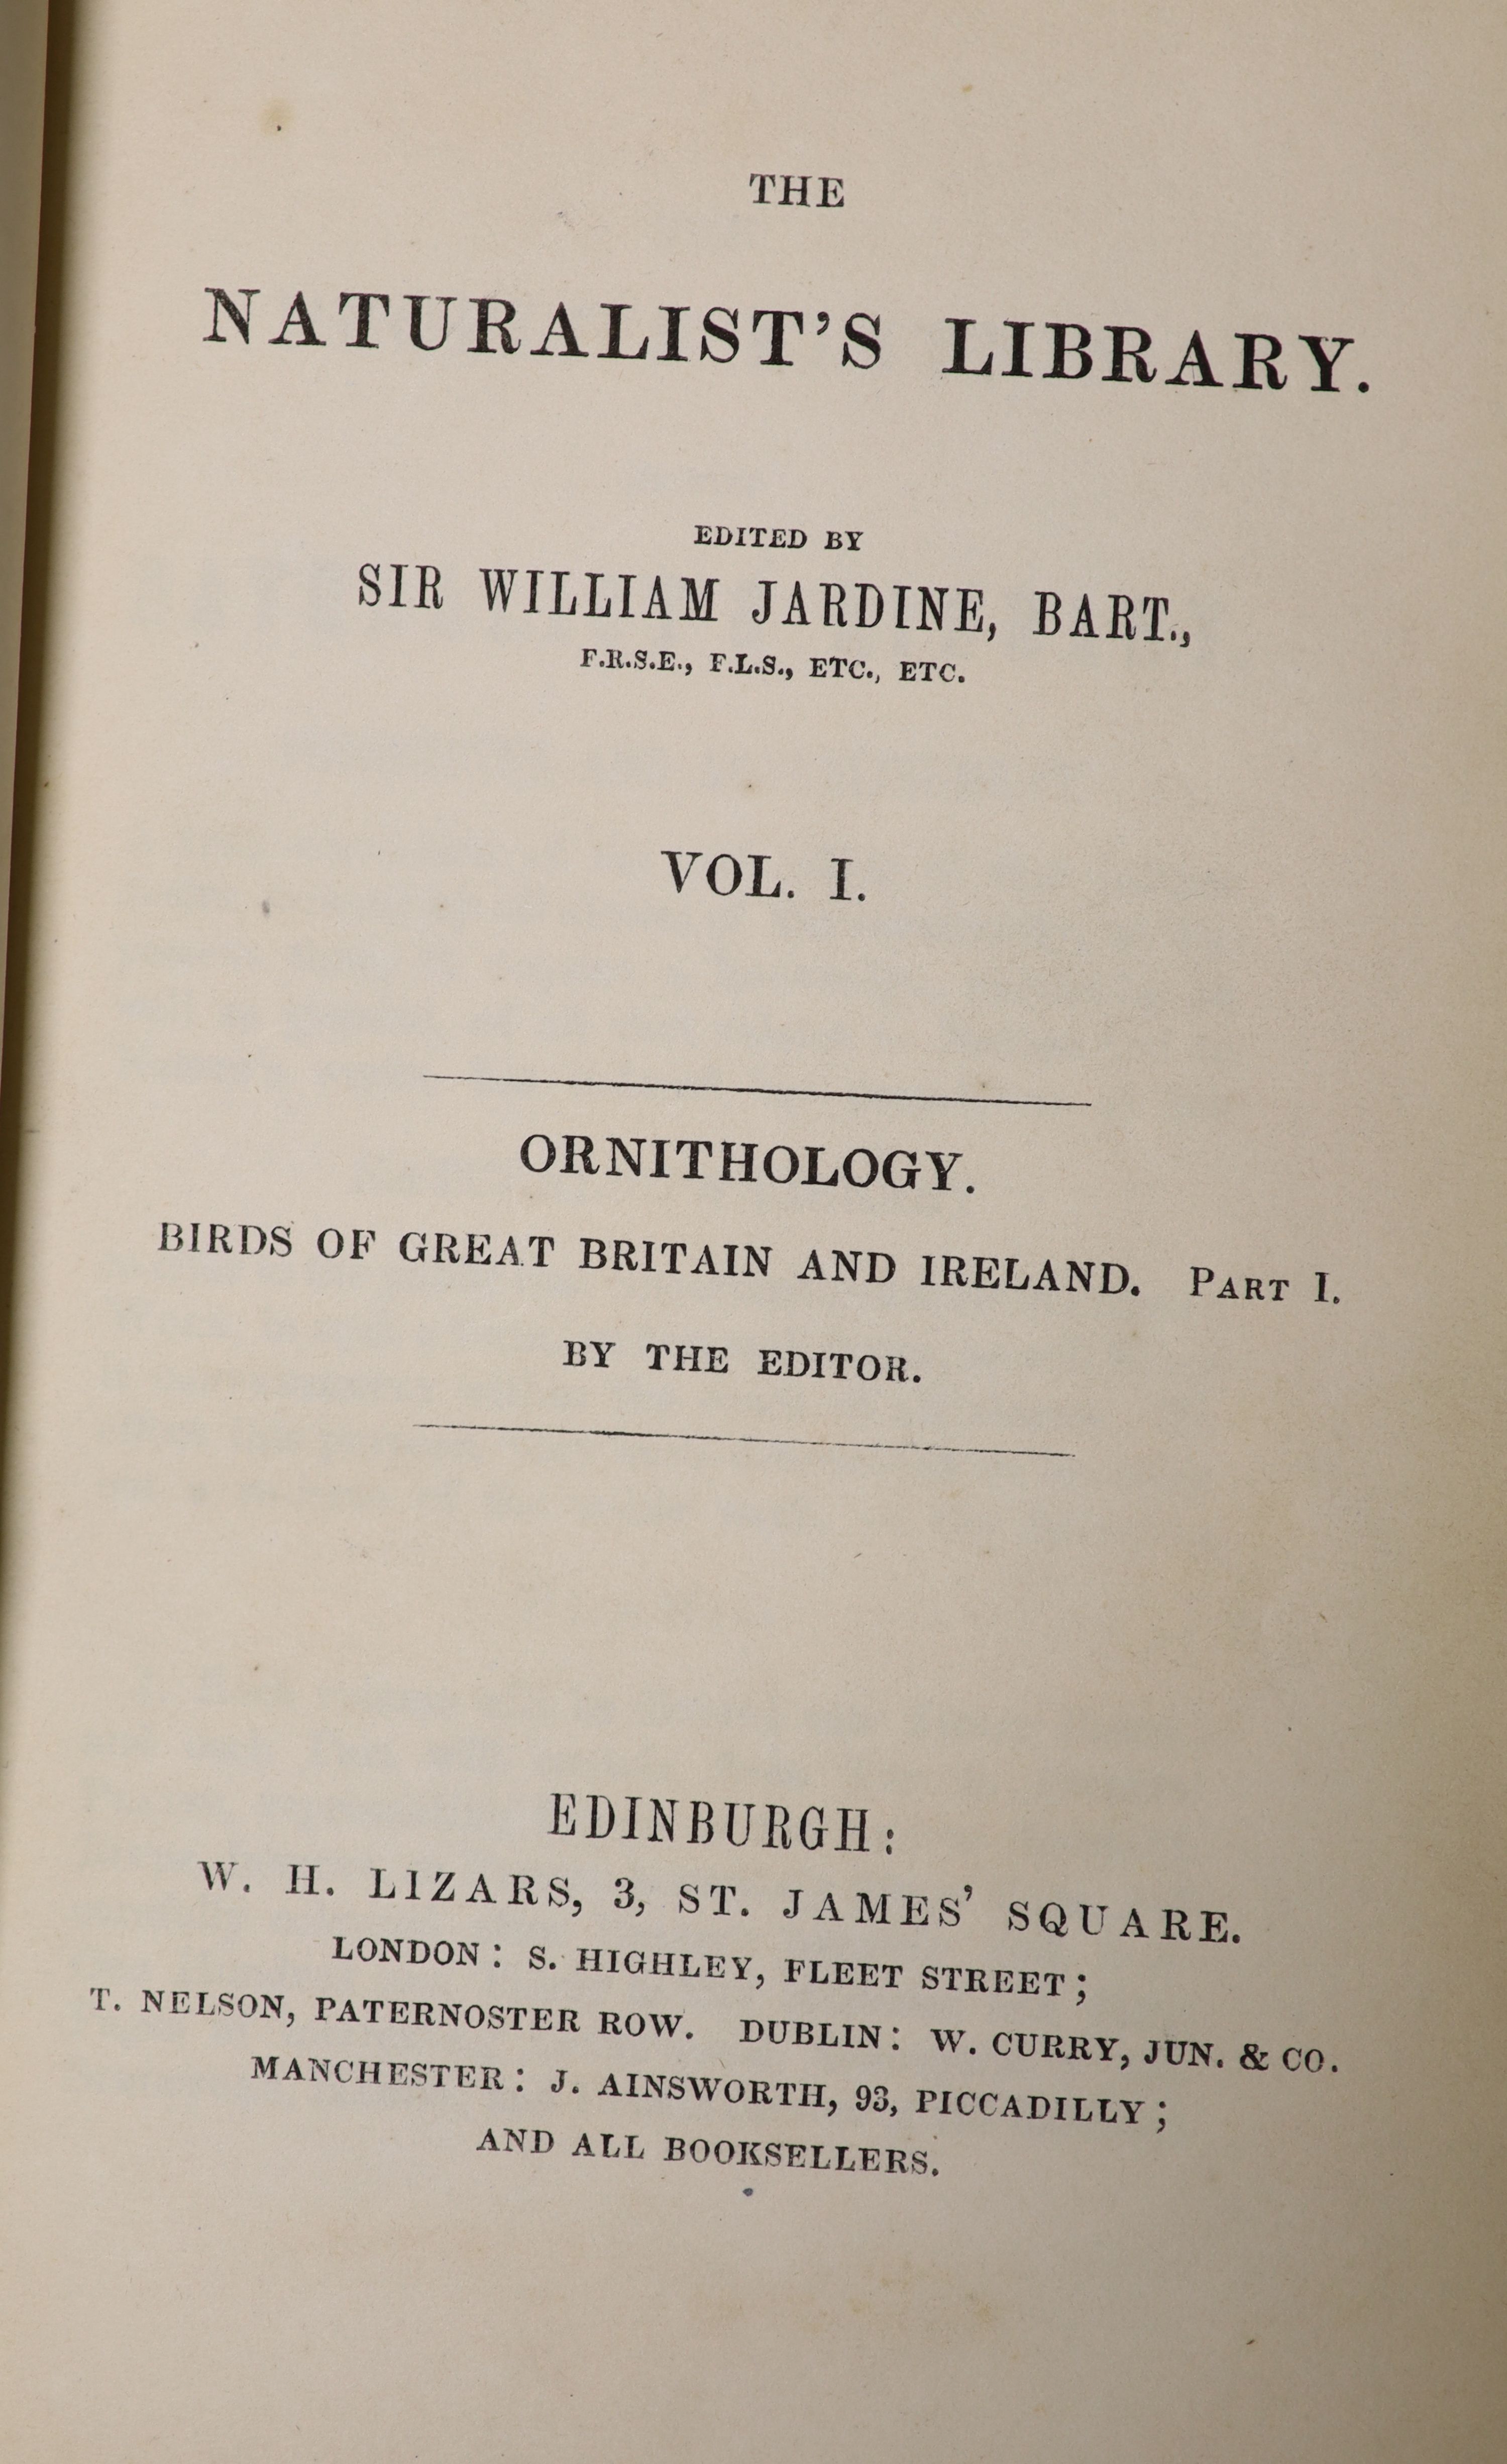 Jardine, William, Sir (editor) - The Naturalists’ Library, Ornithology. Birds of Great Britain and Ireland, 8vo, rebound red cloth gilt, front boards retained, end papers renewed, vols I, 11, 111, V, VI, and VII, with po